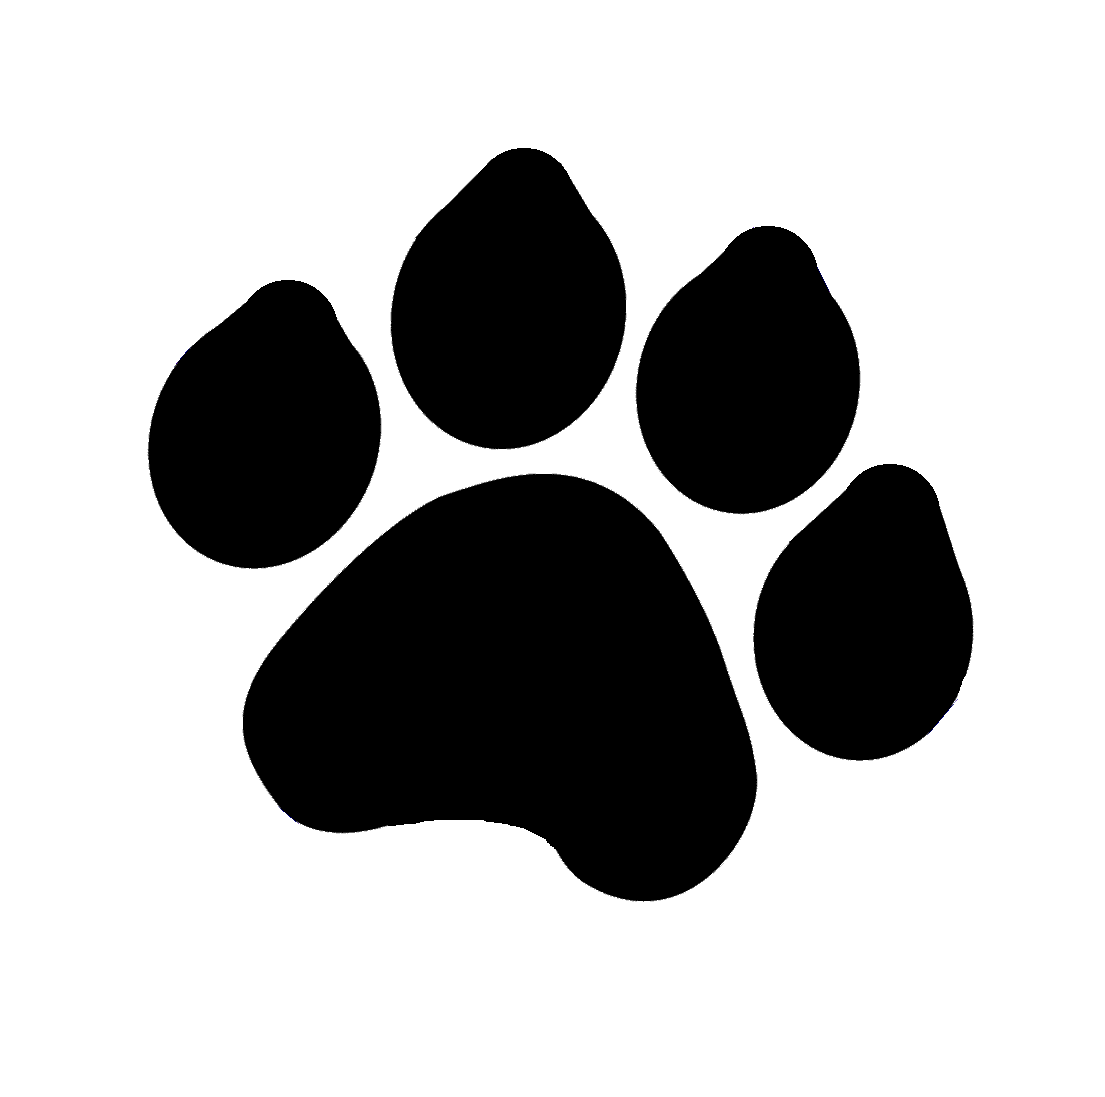 Grizzly Bear Paw Print Clipart.